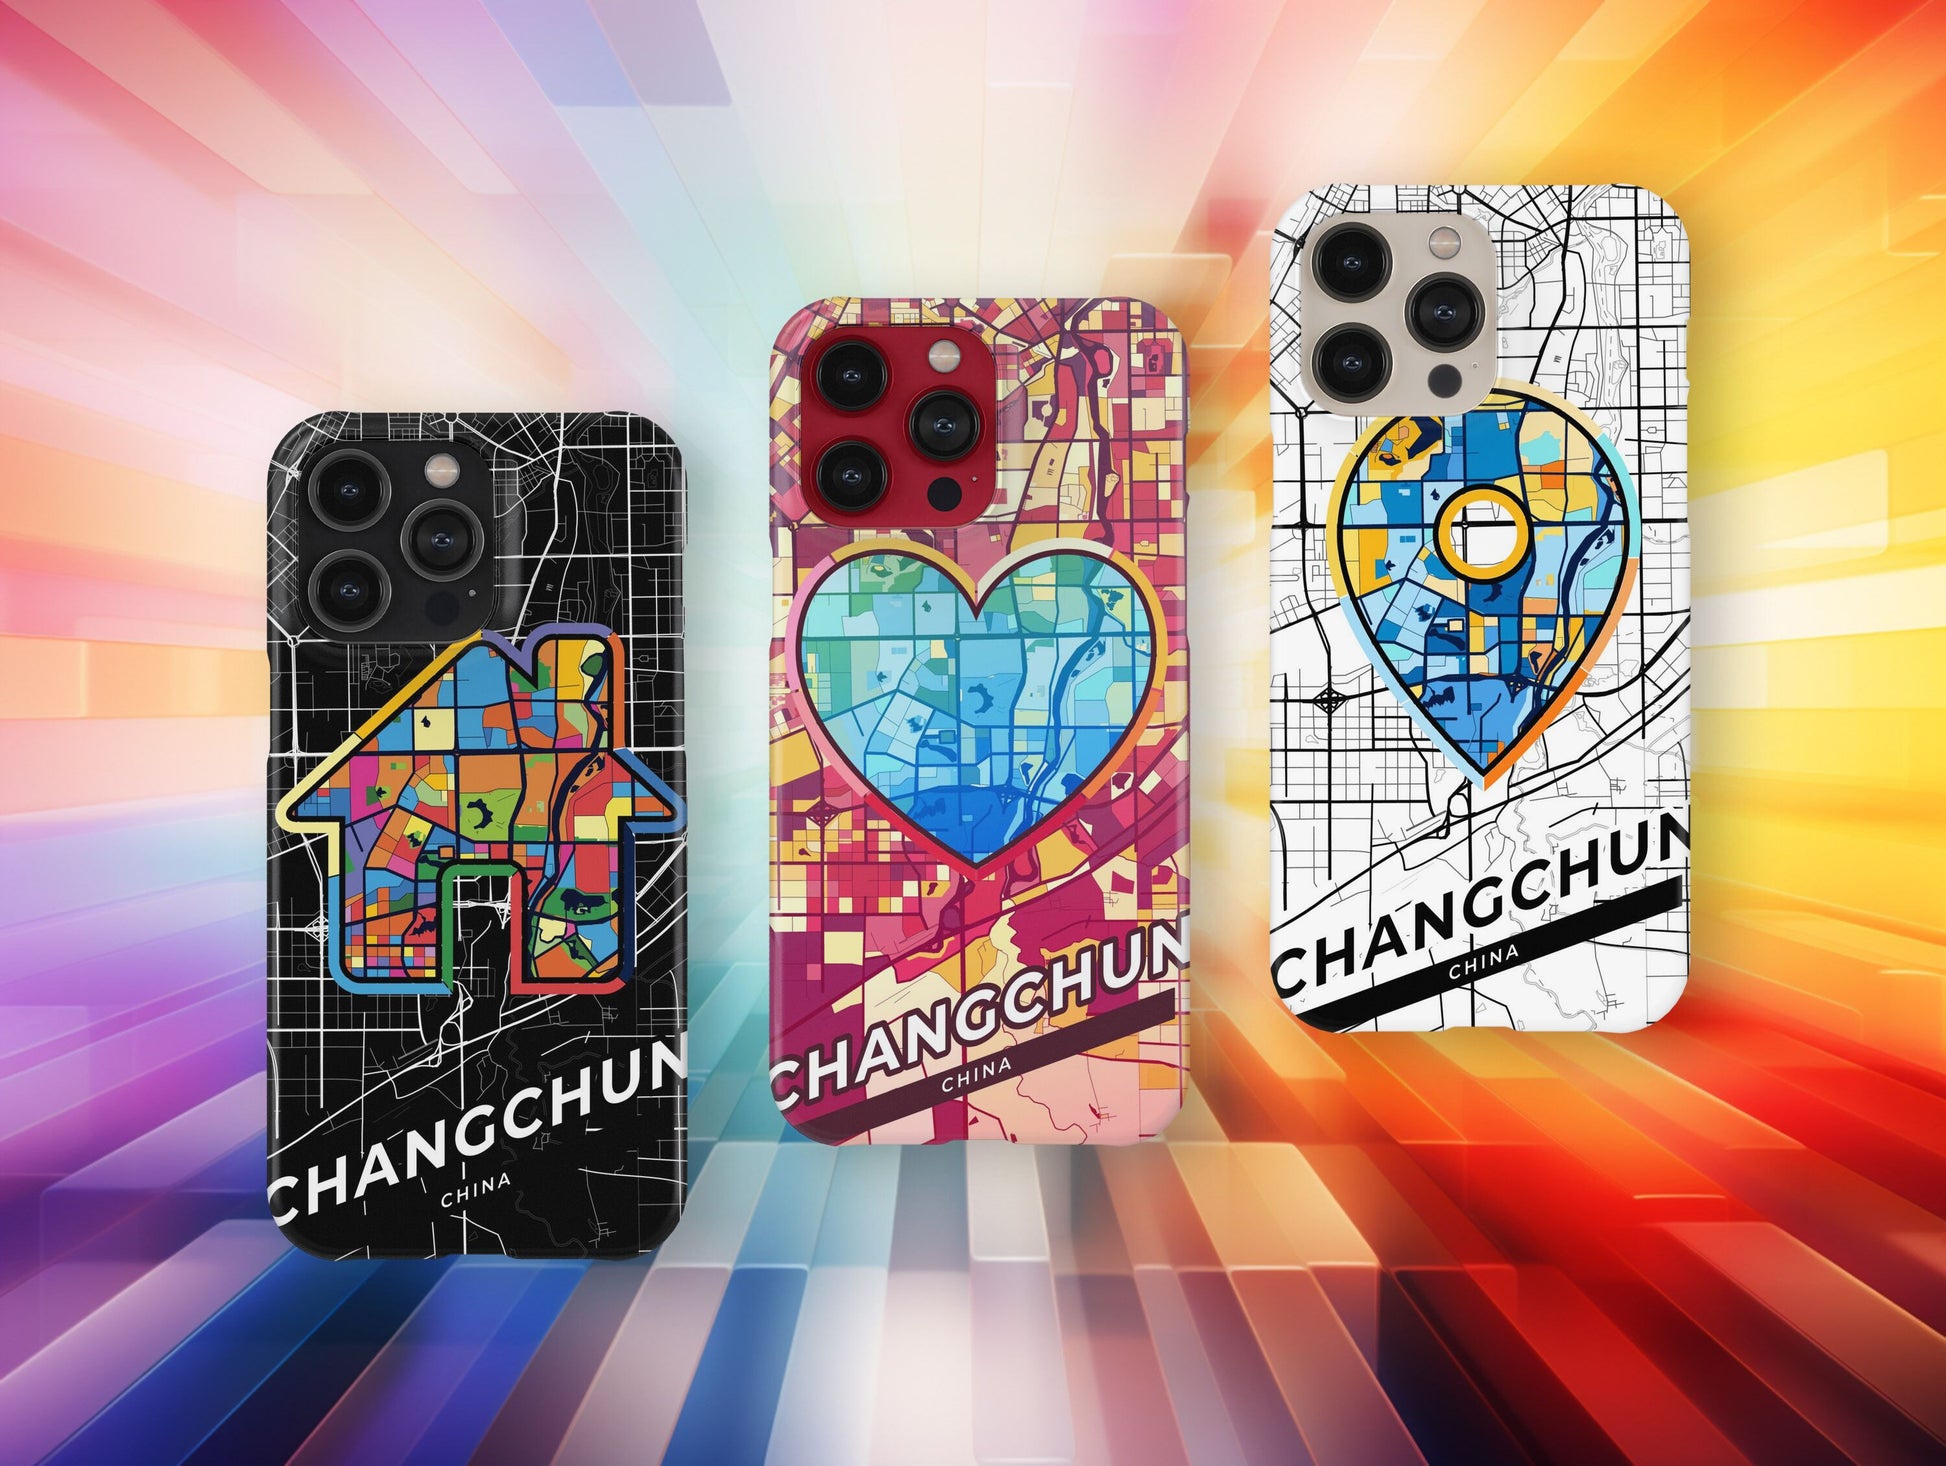 Changchun China slim phone case with colorful icon. Birthday, wedding or housewarming gift. Couple match cases.